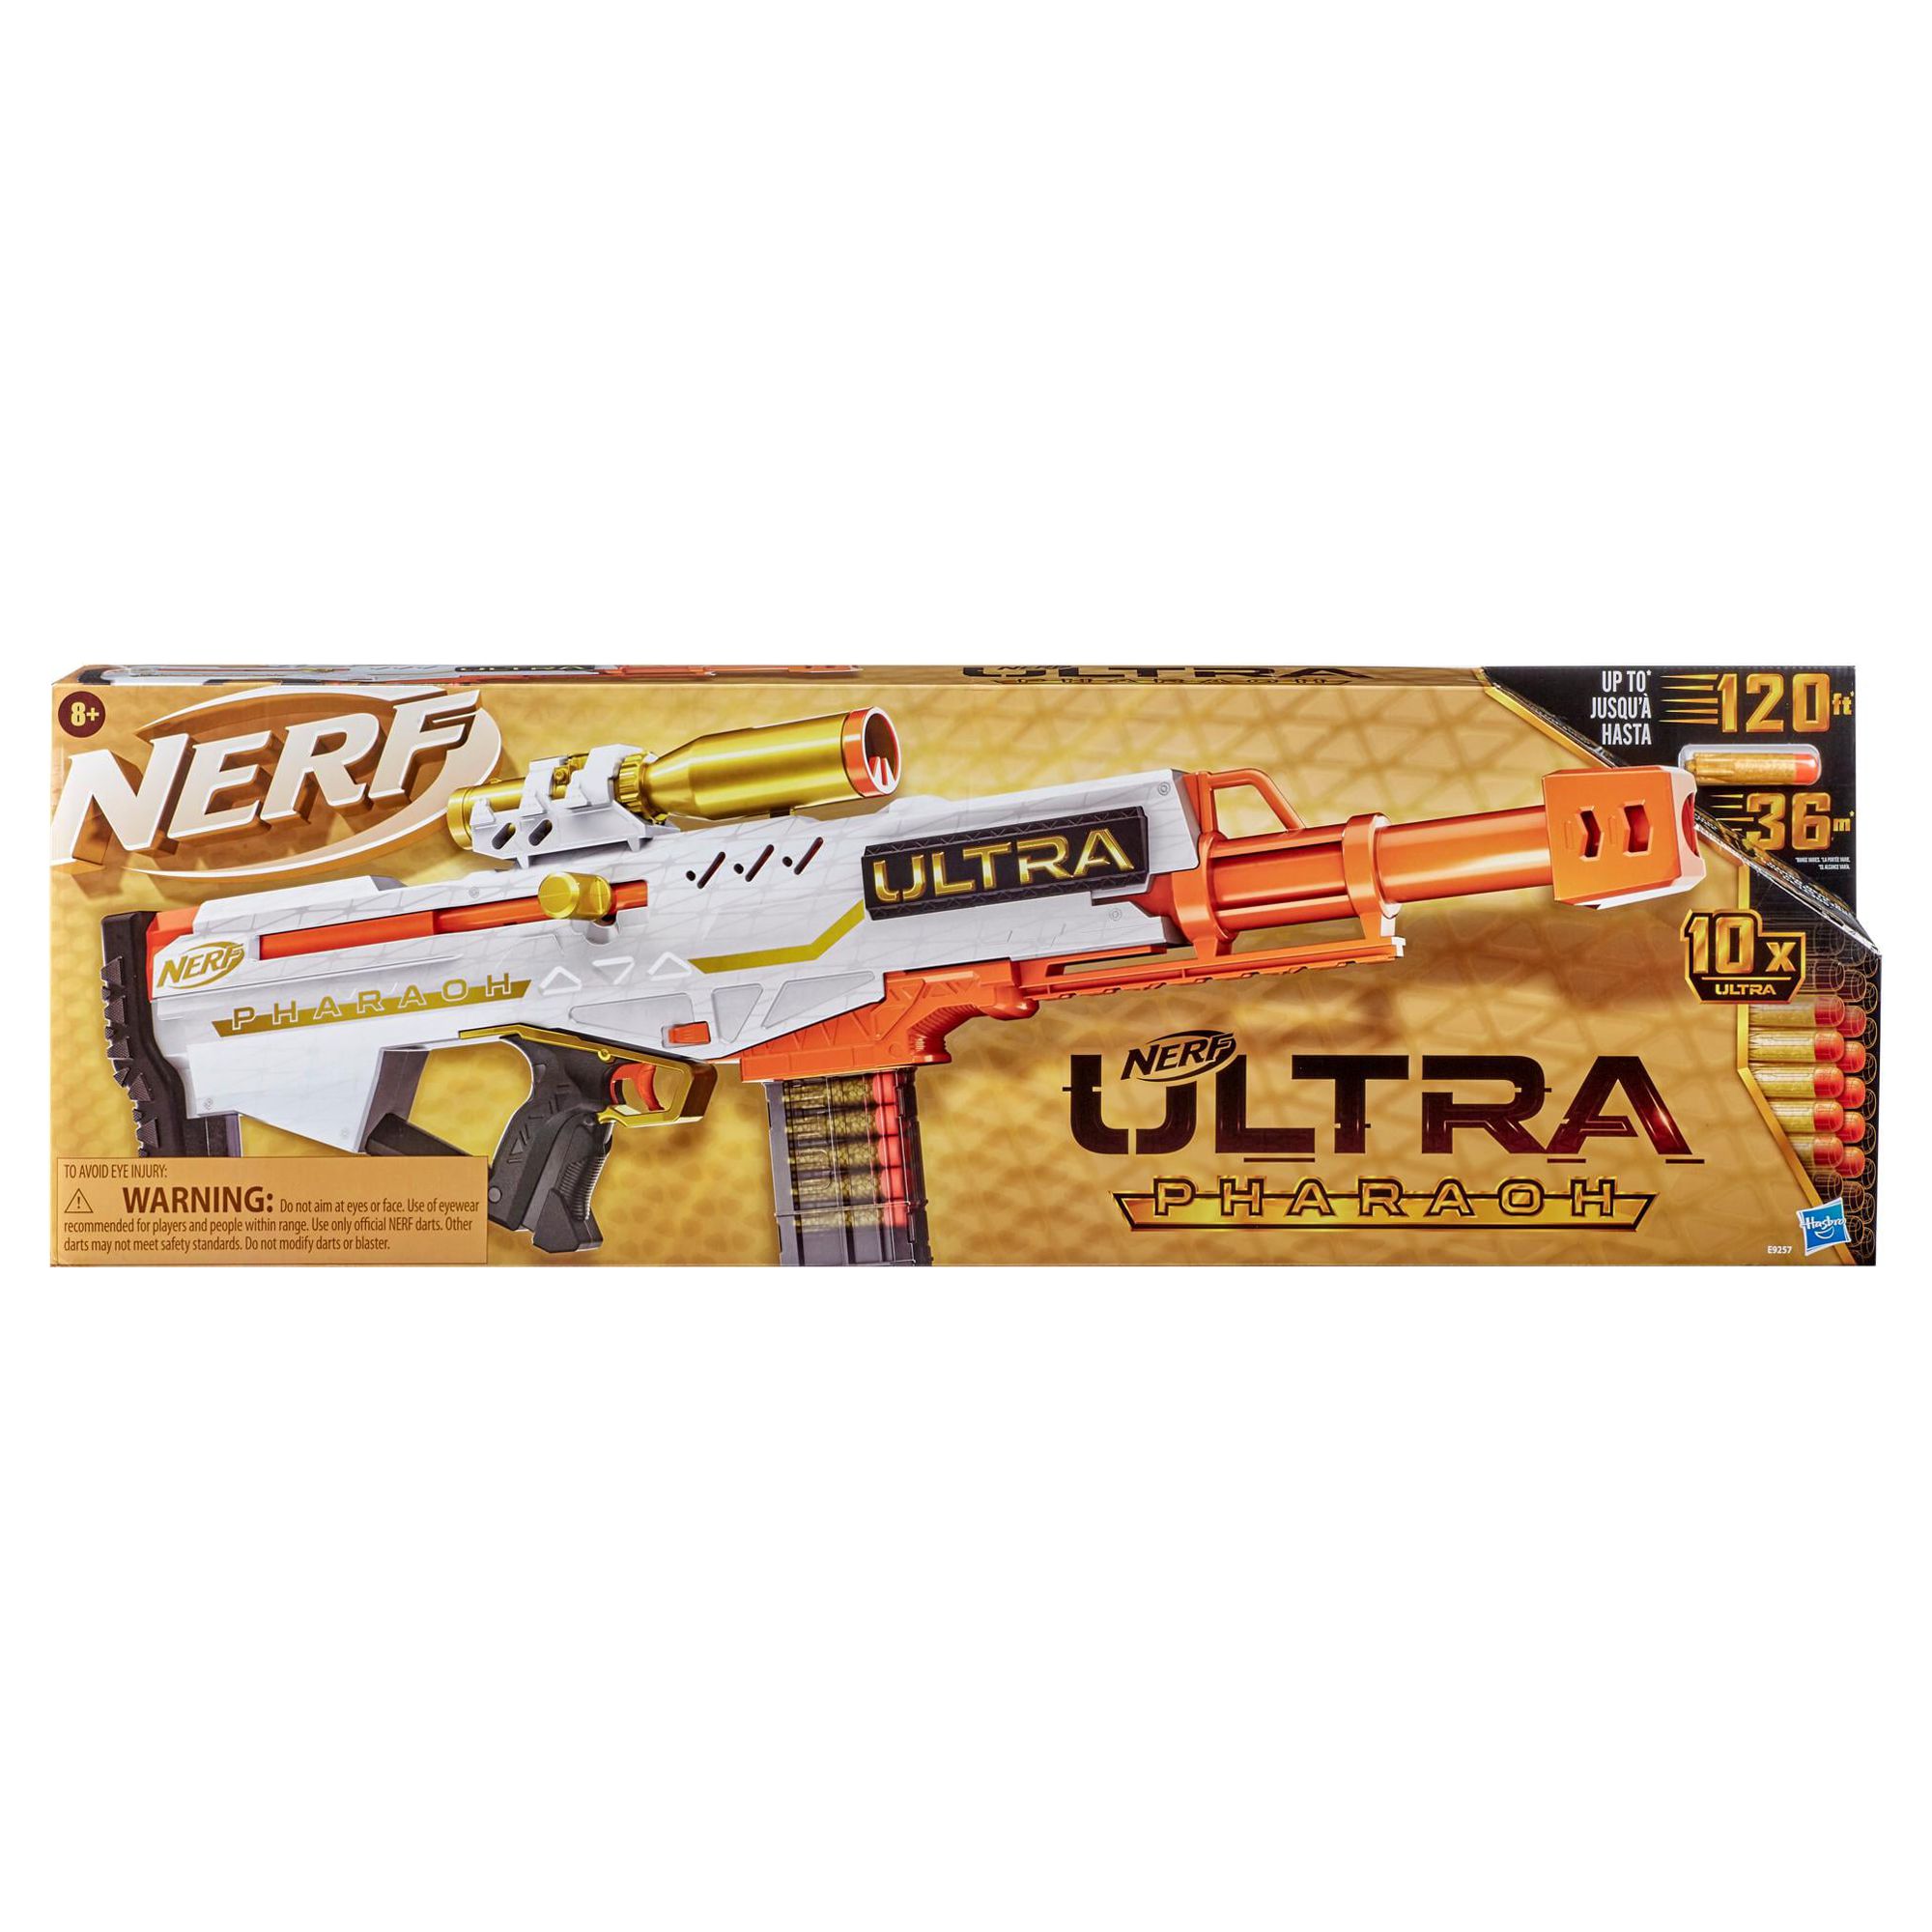 Nerf Ultra Pharaoh Blaster -- Gold Accents, 10-Dart Clip, 10 Nerf Ultra Darts, Compatible Only with Nerf Ultra Darts - image 3 of 7